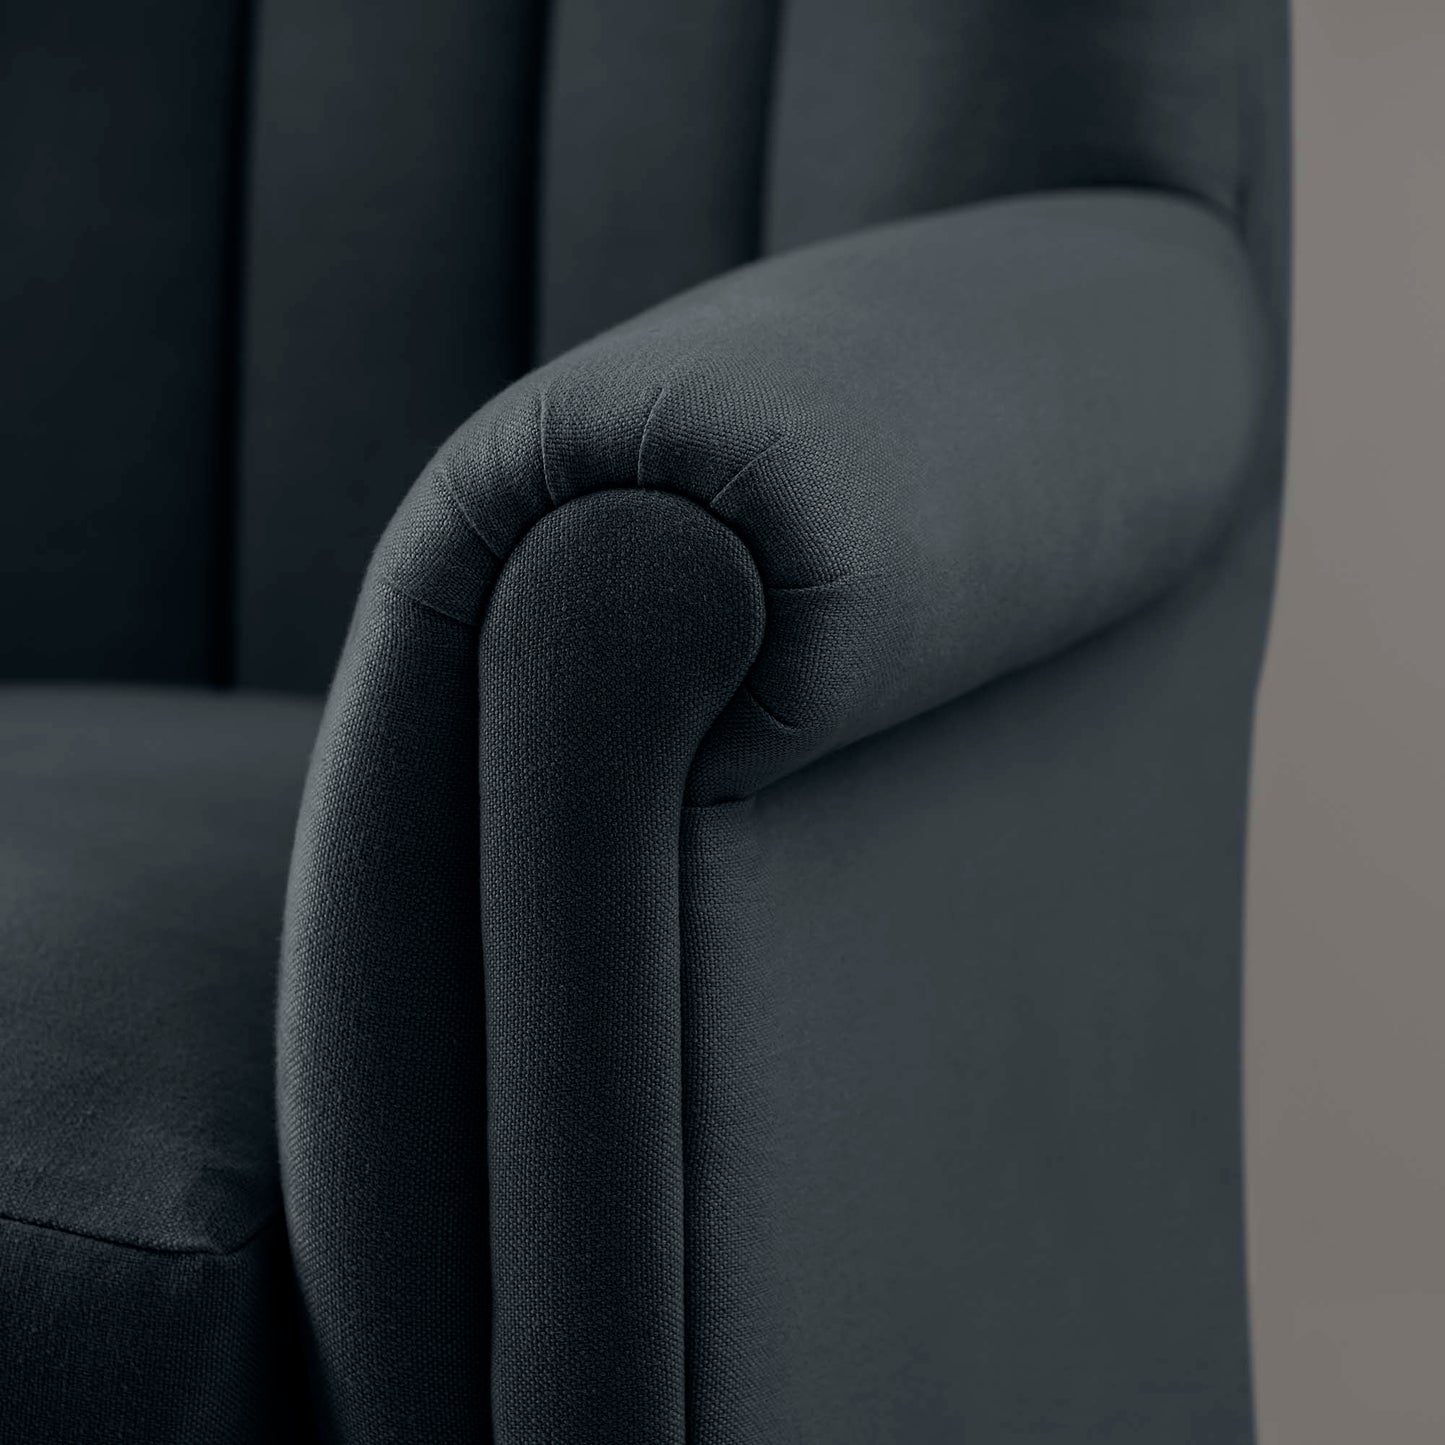 Time Out Armchair in Laidback Linen Midnight